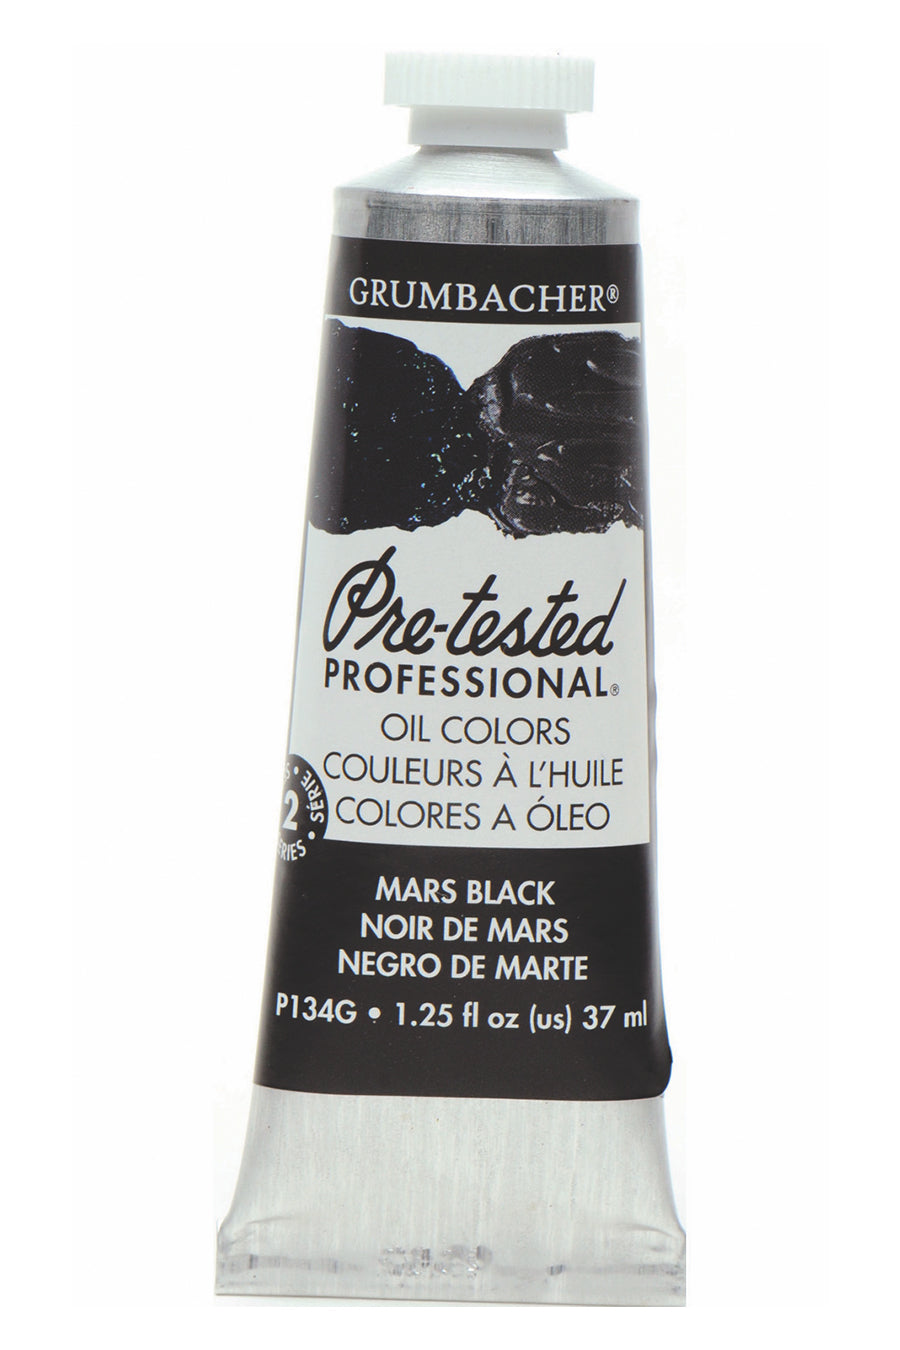 Grumbacher® Pre-tested® Oil Black Color Family